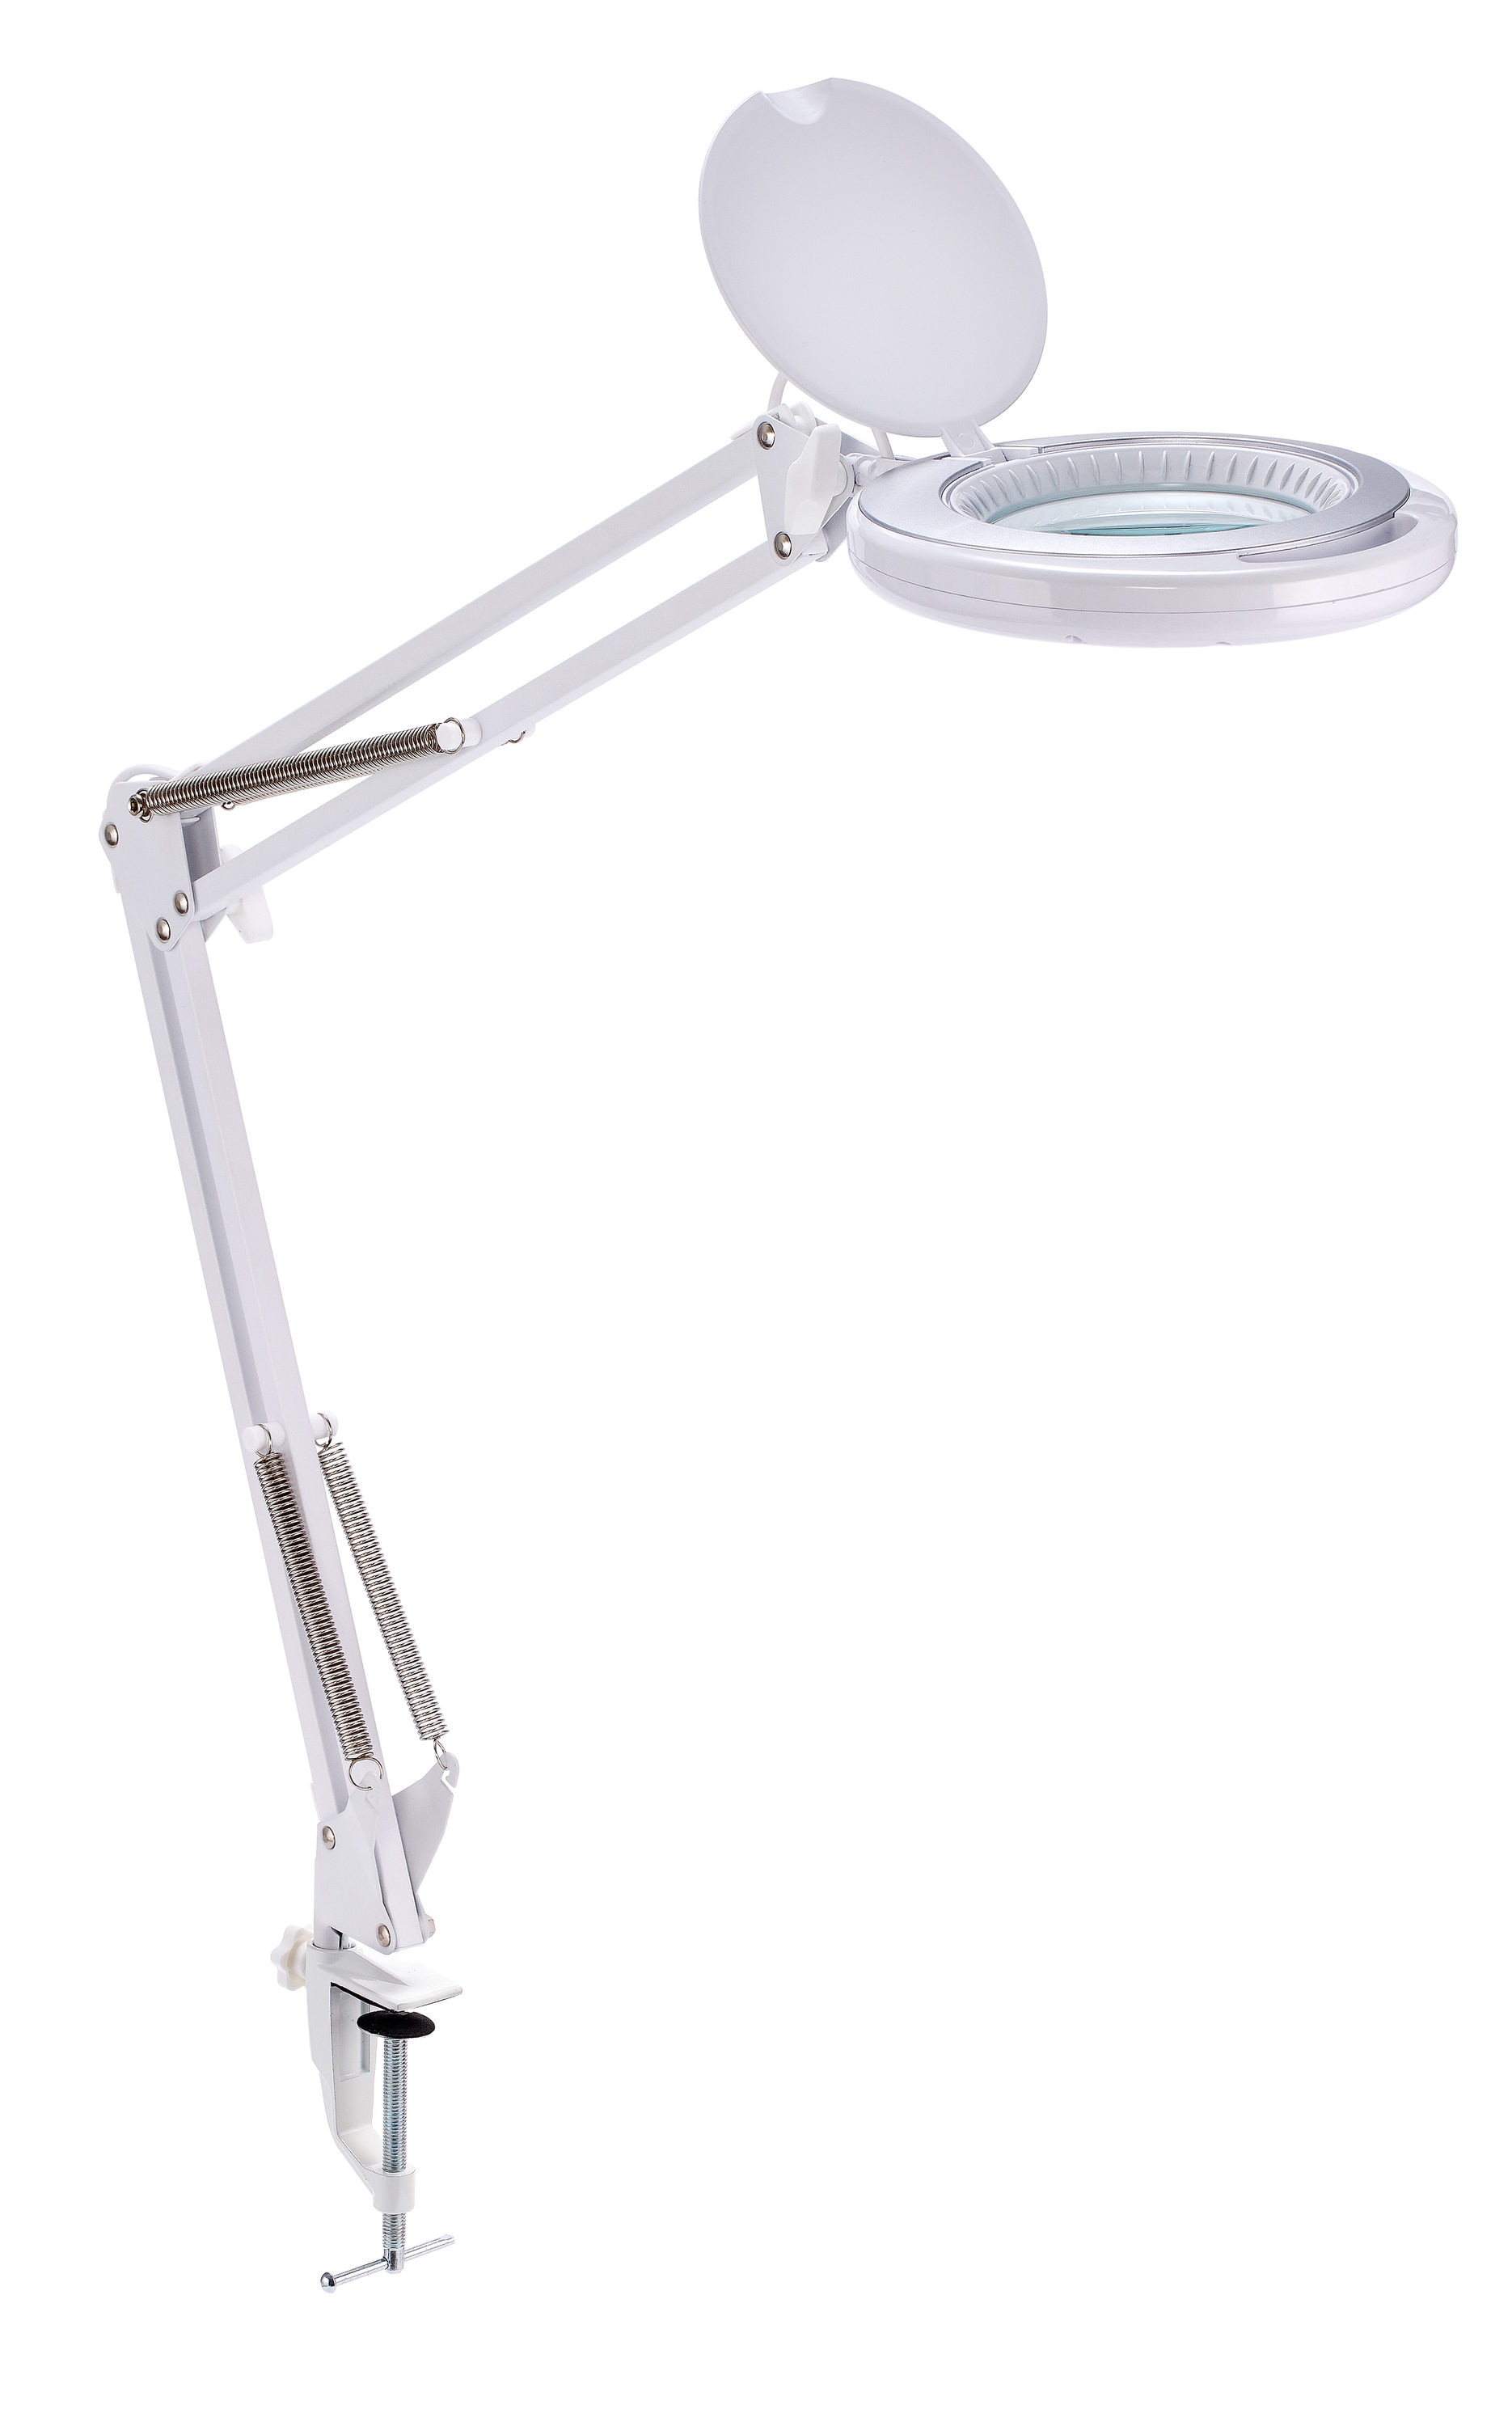 Bostitch 10-in Adjustable Magnifying White Desk Lamp with Plastic Shade at